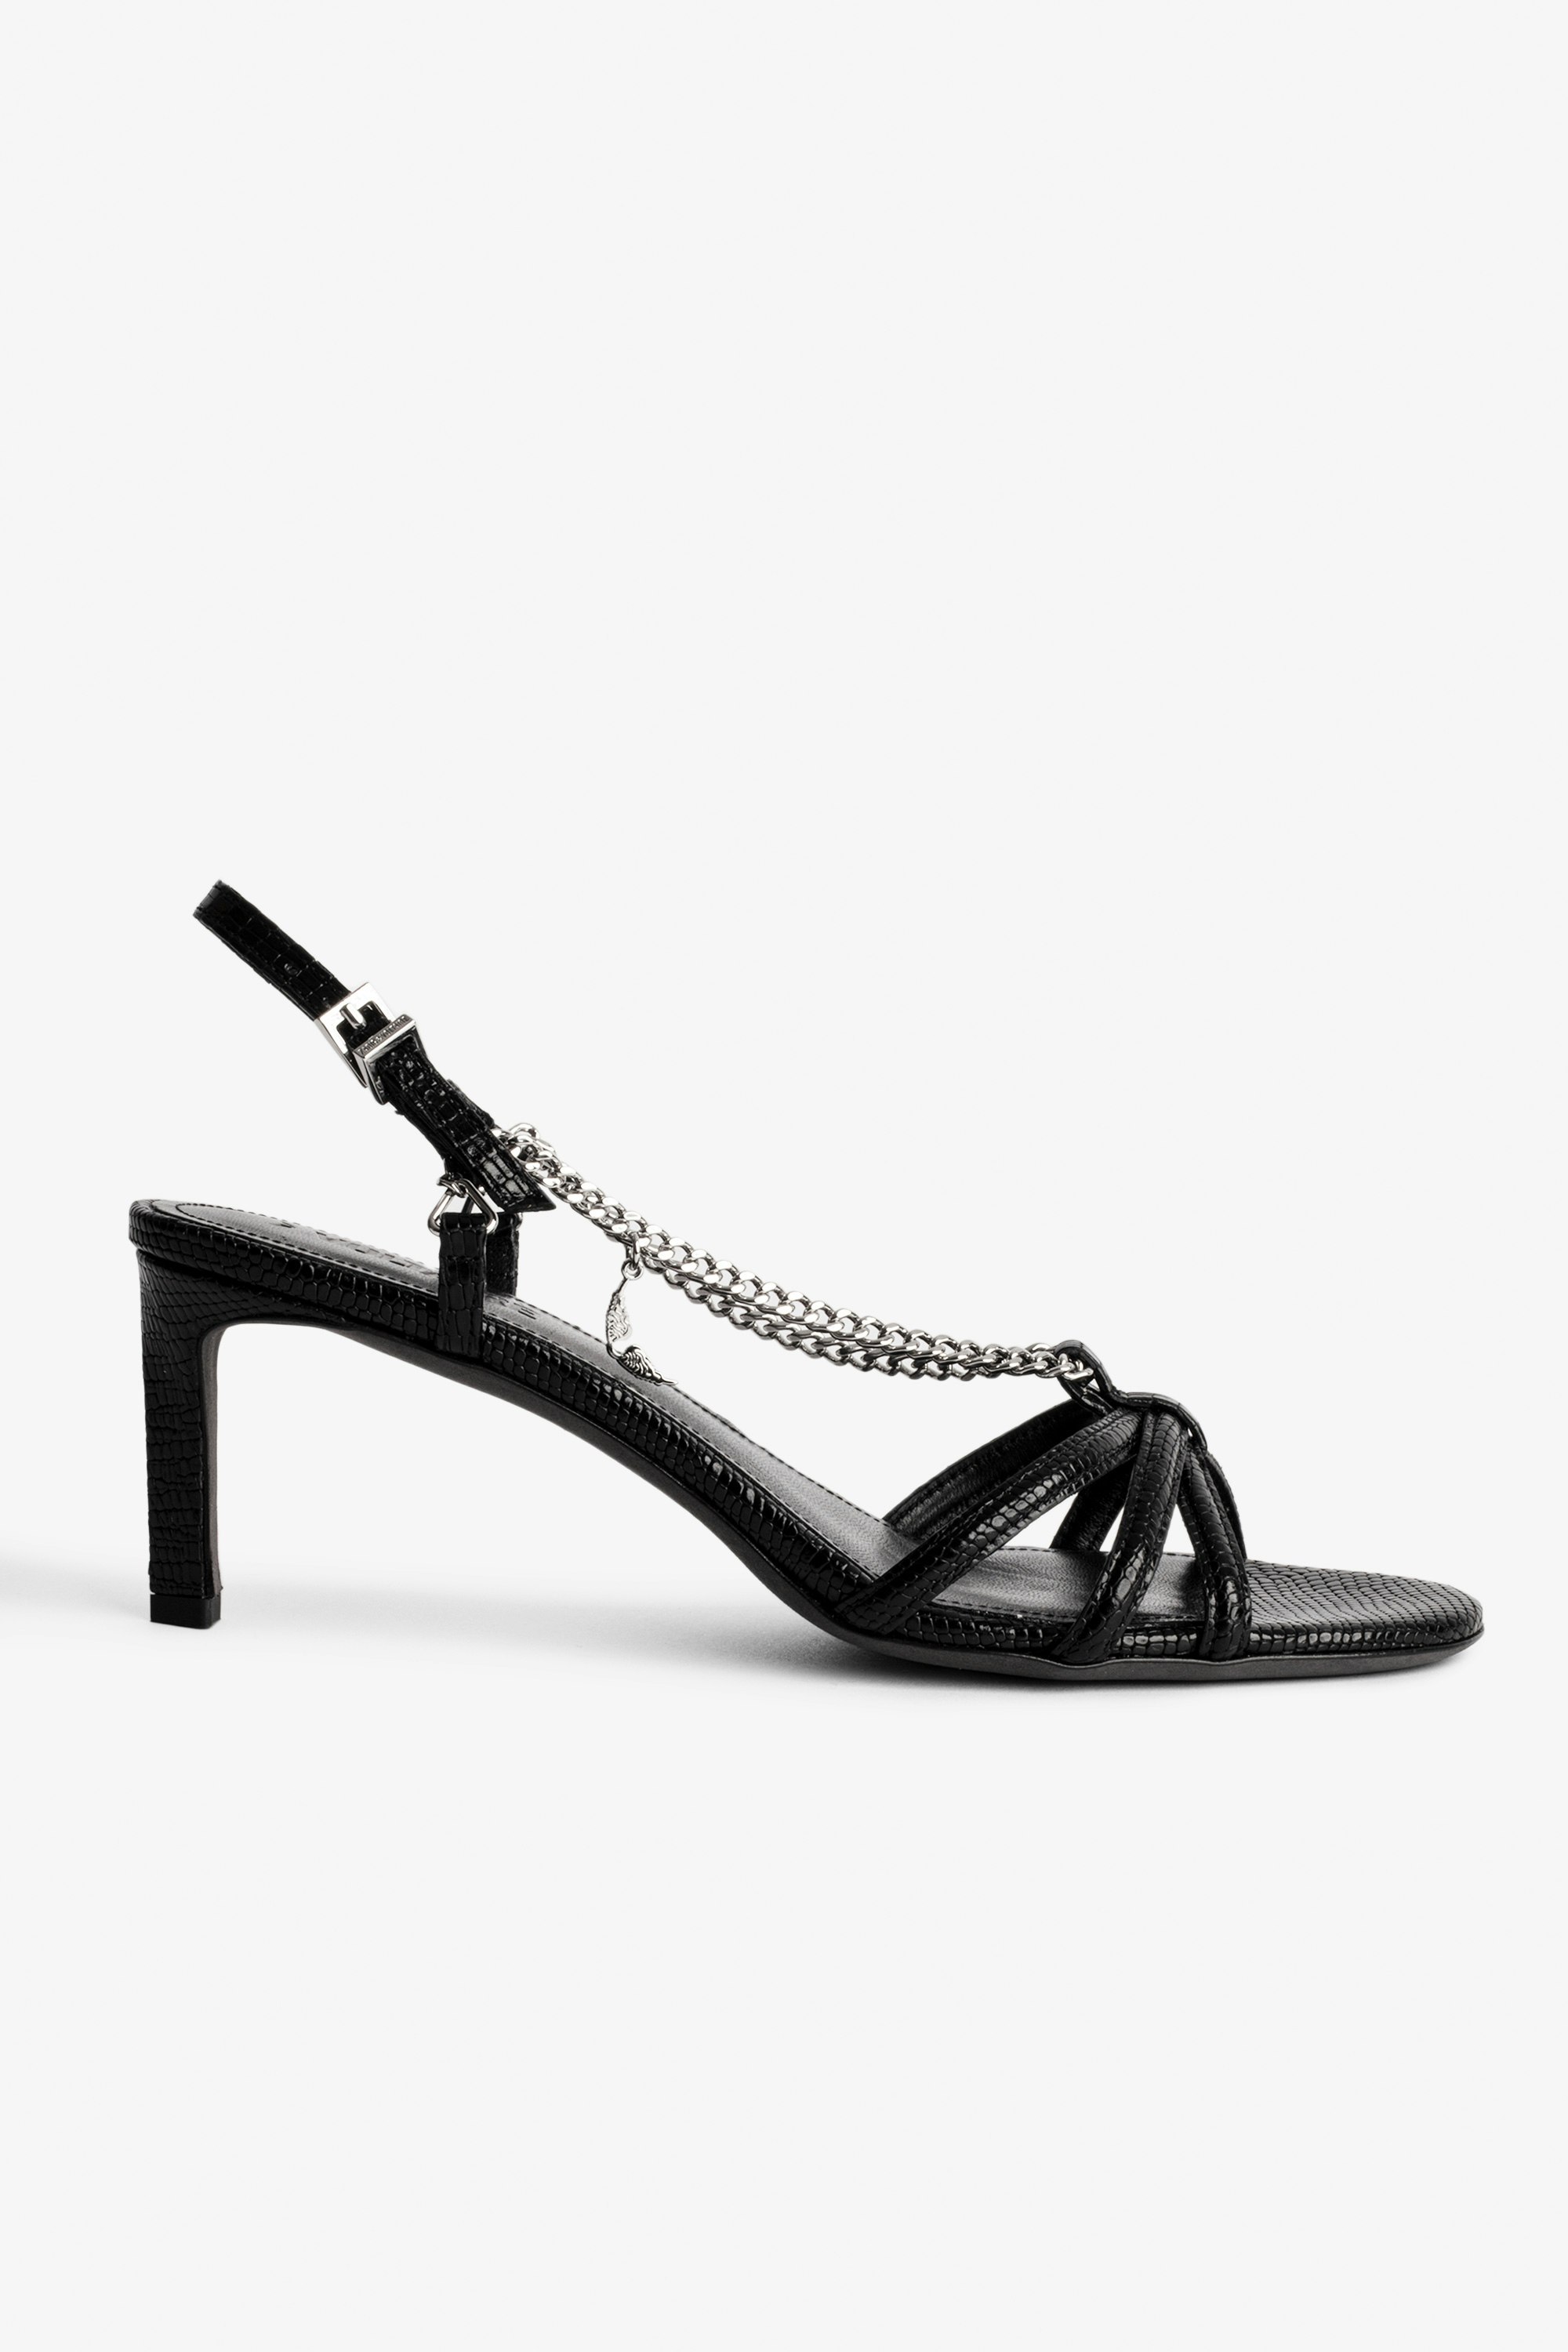 Sleepless Sandals - Women’s black embossed leather sandals with straps and chains.